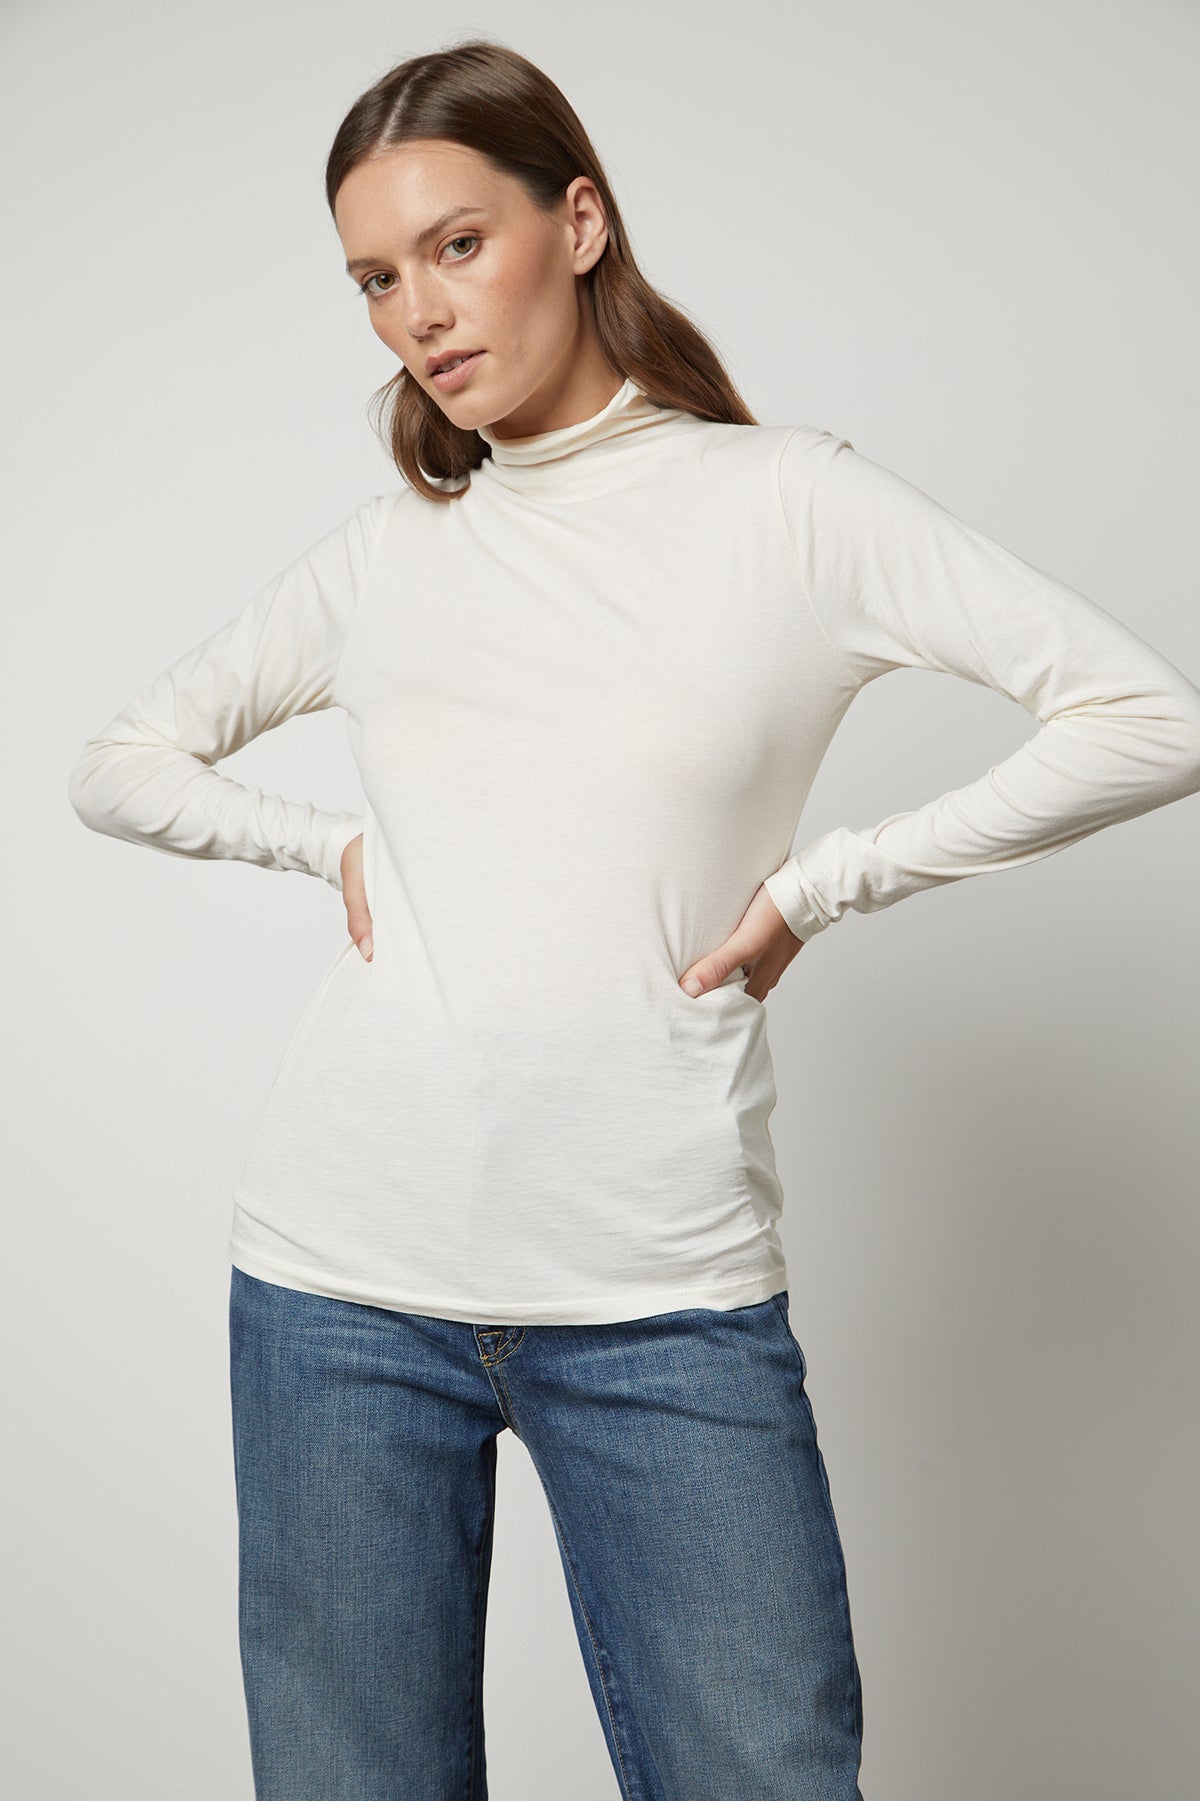 The model is wearing a TALISIA GAUZY WHISPER FITTED MOCK NECK TEE, a wardrobe staple in the fashion world by Velvet by Graham & Spencer.-35230354145473